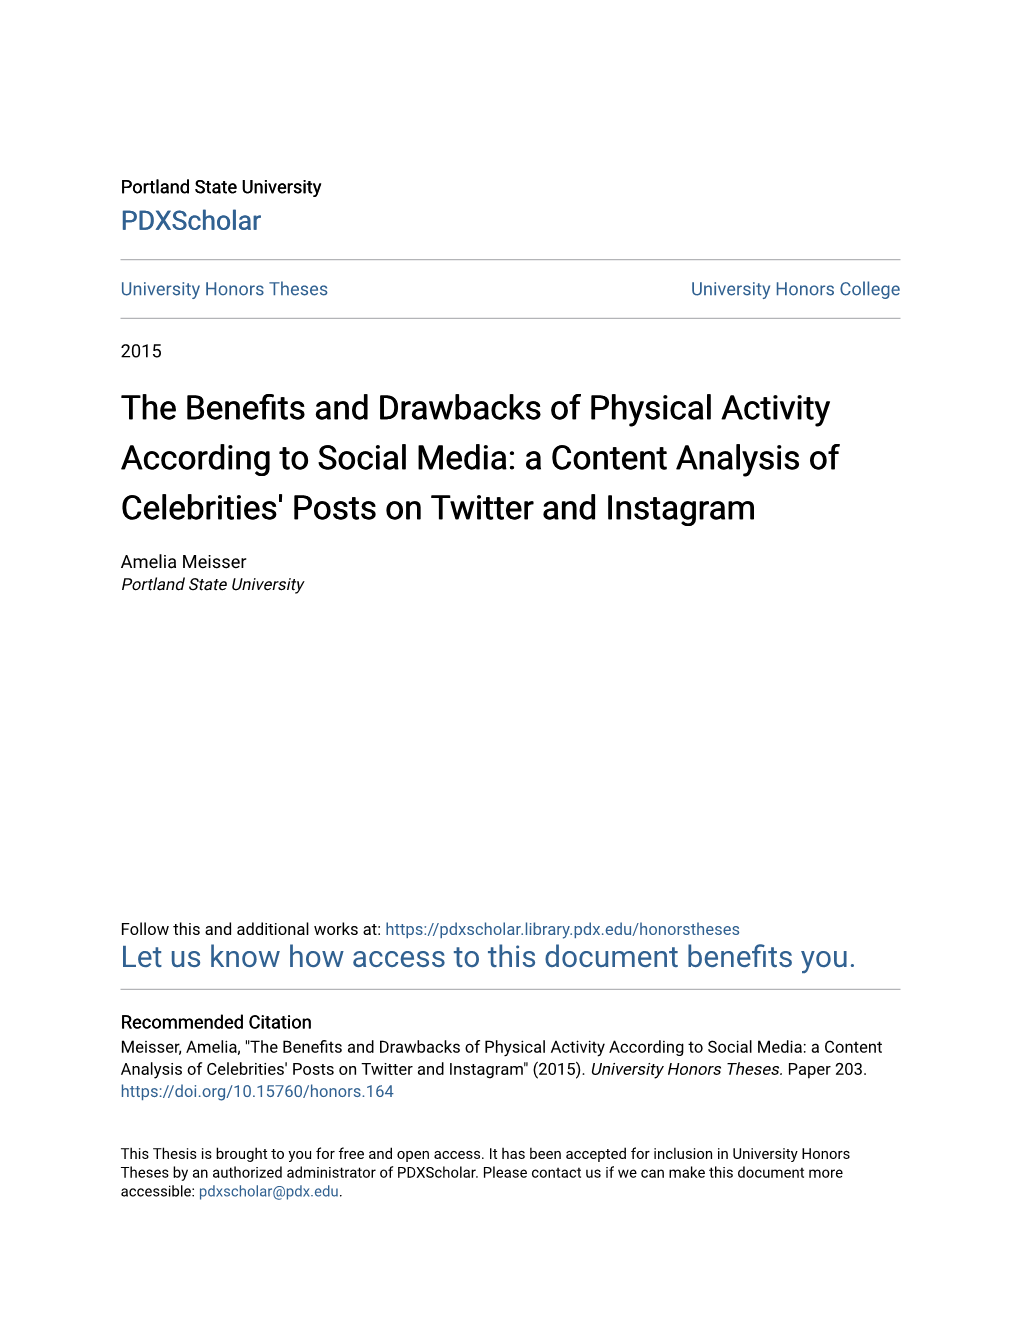 The Benefits and Drawbacks of Physical Activity According to Social Media: a Content Analysis of Celebrities' Posts on Twitter and Instagram